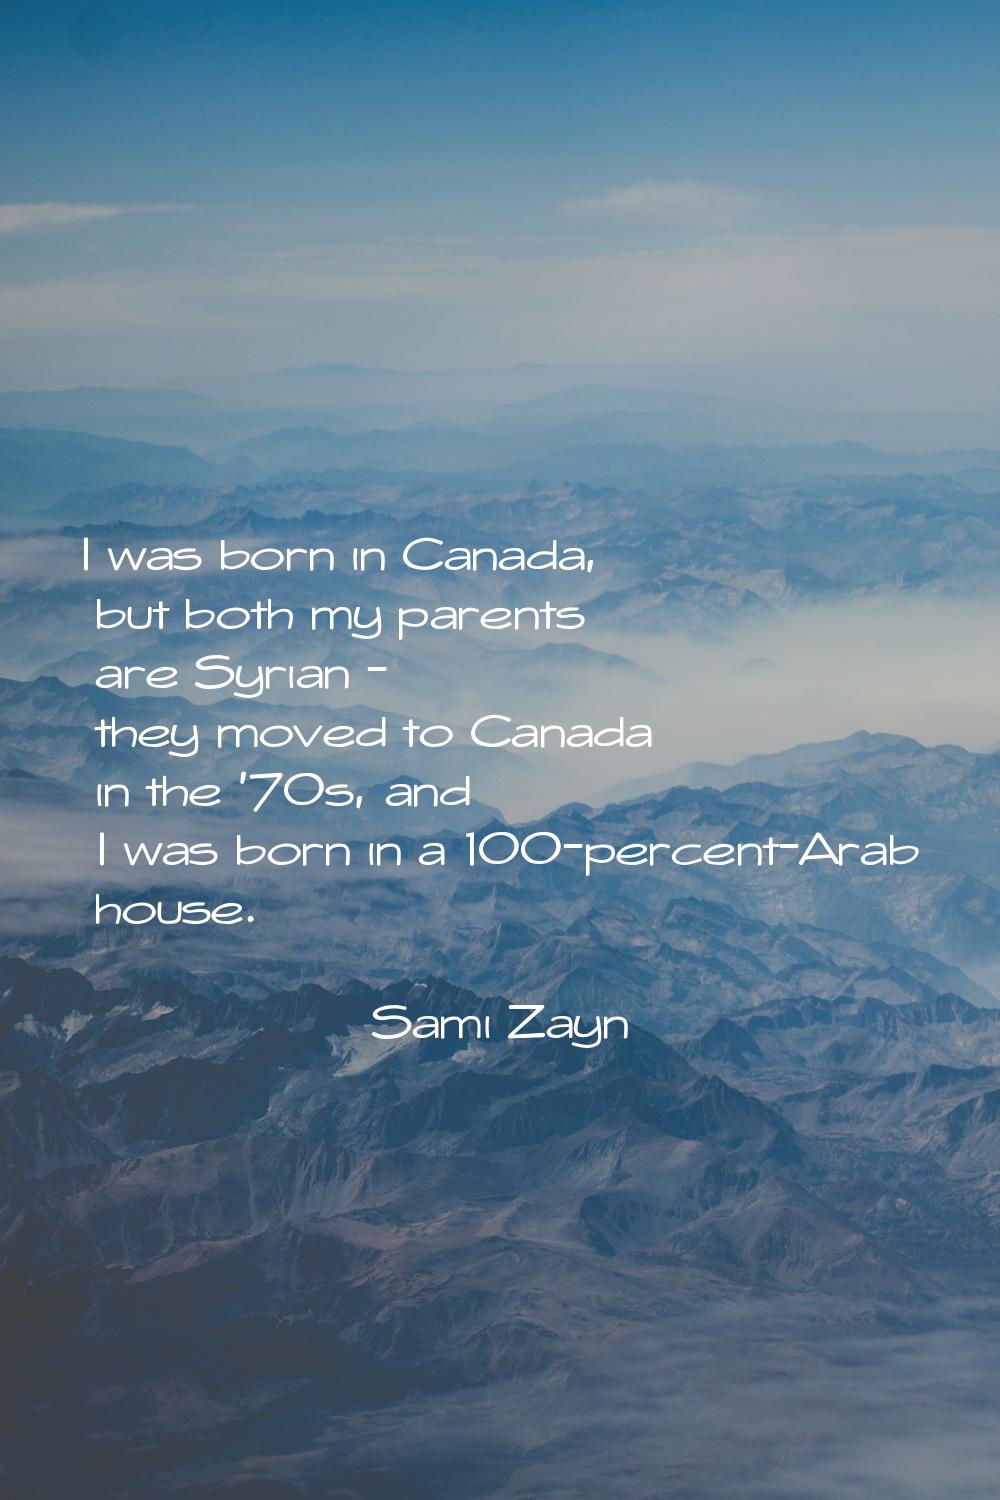 I was born in Canada, but both my parents are Syrian - they moved to Canada in the '70s, and I was 